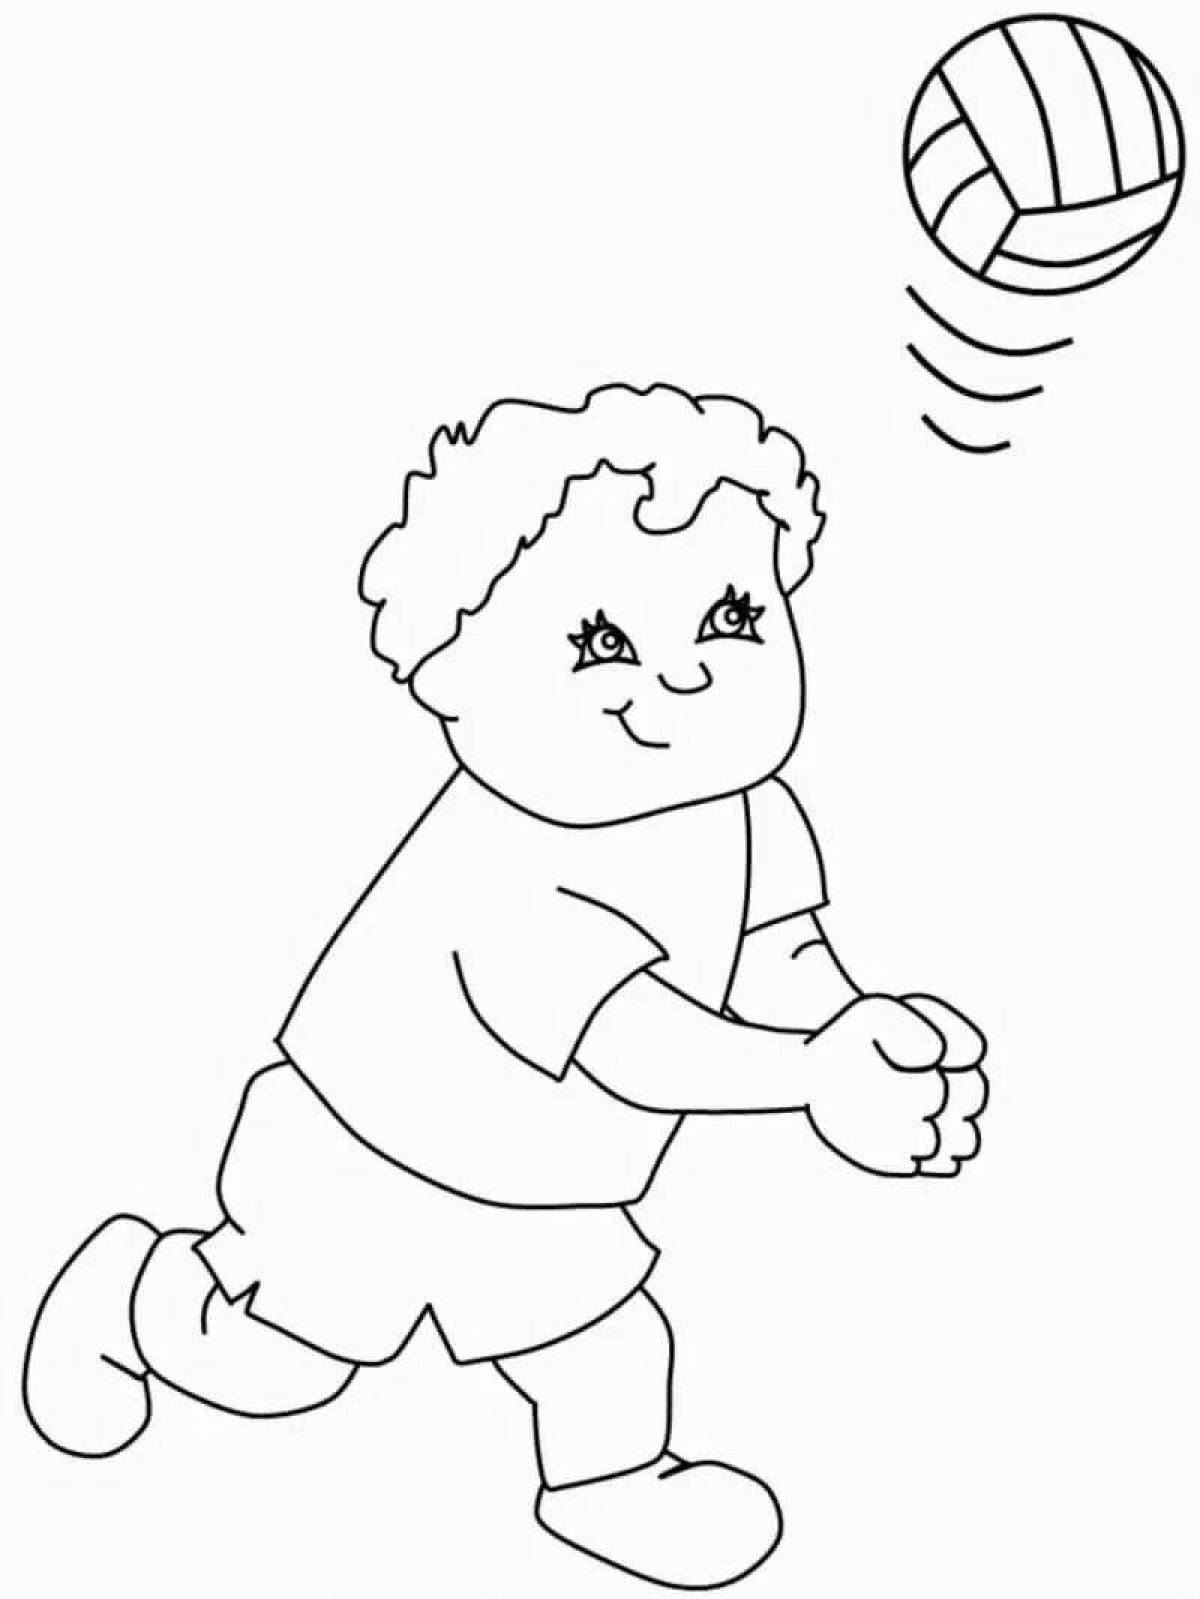 Tempting sports coloring pages for kids